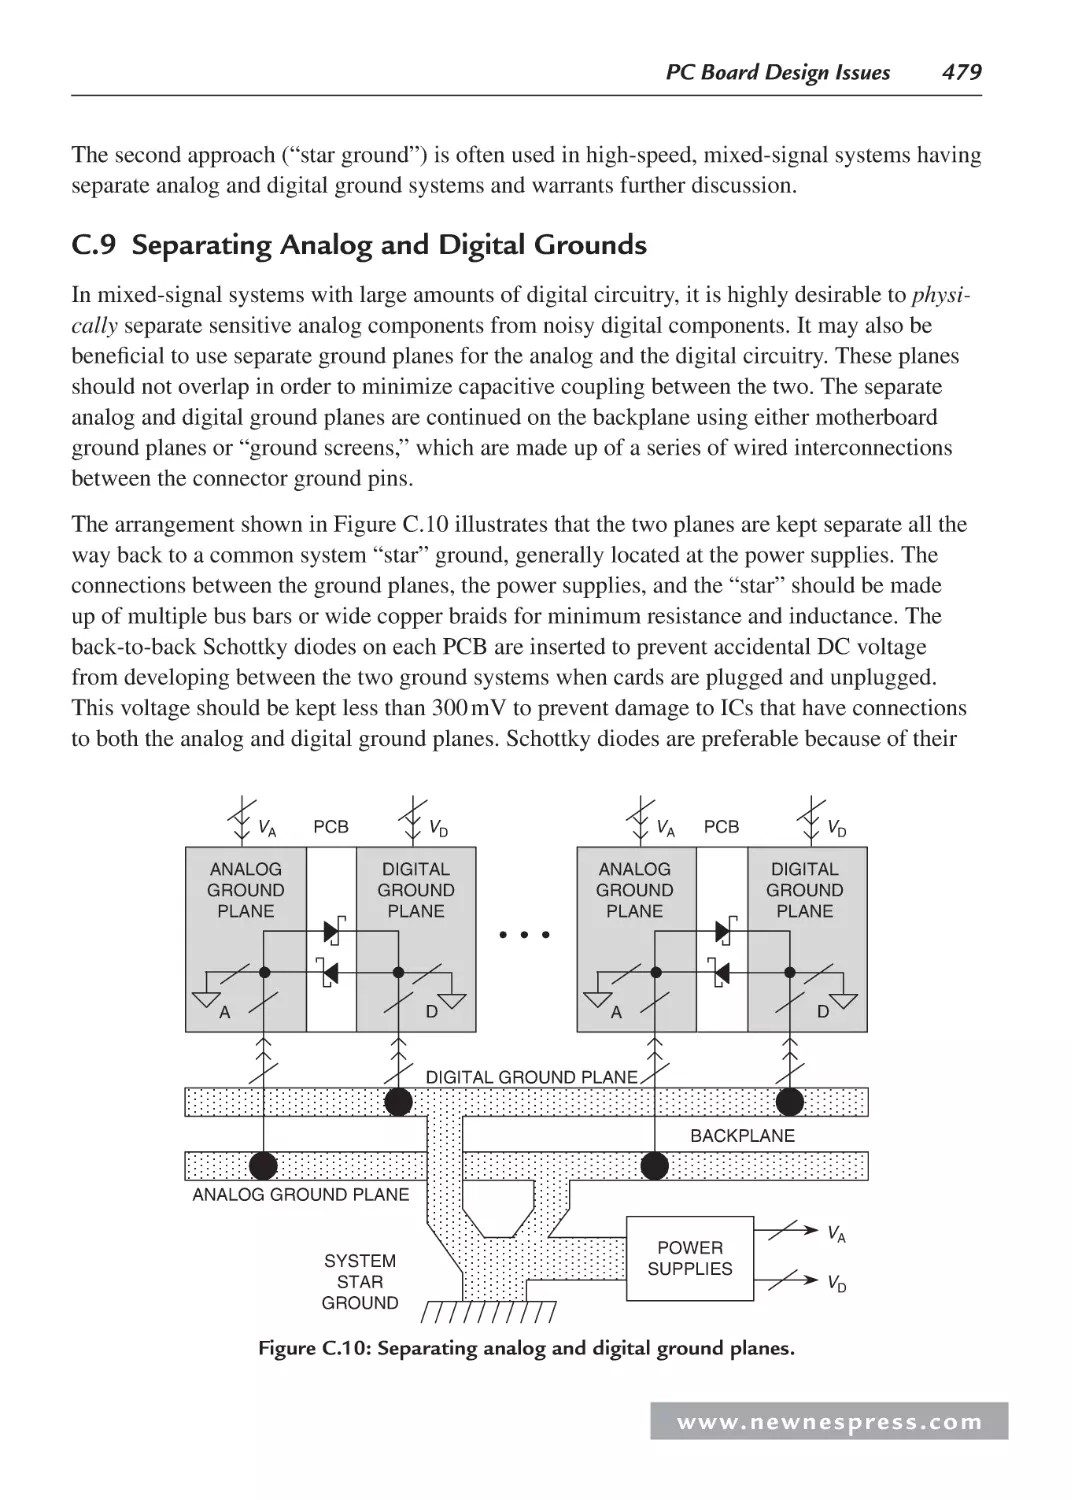 C.9 Separating Analog and Digital Grounds